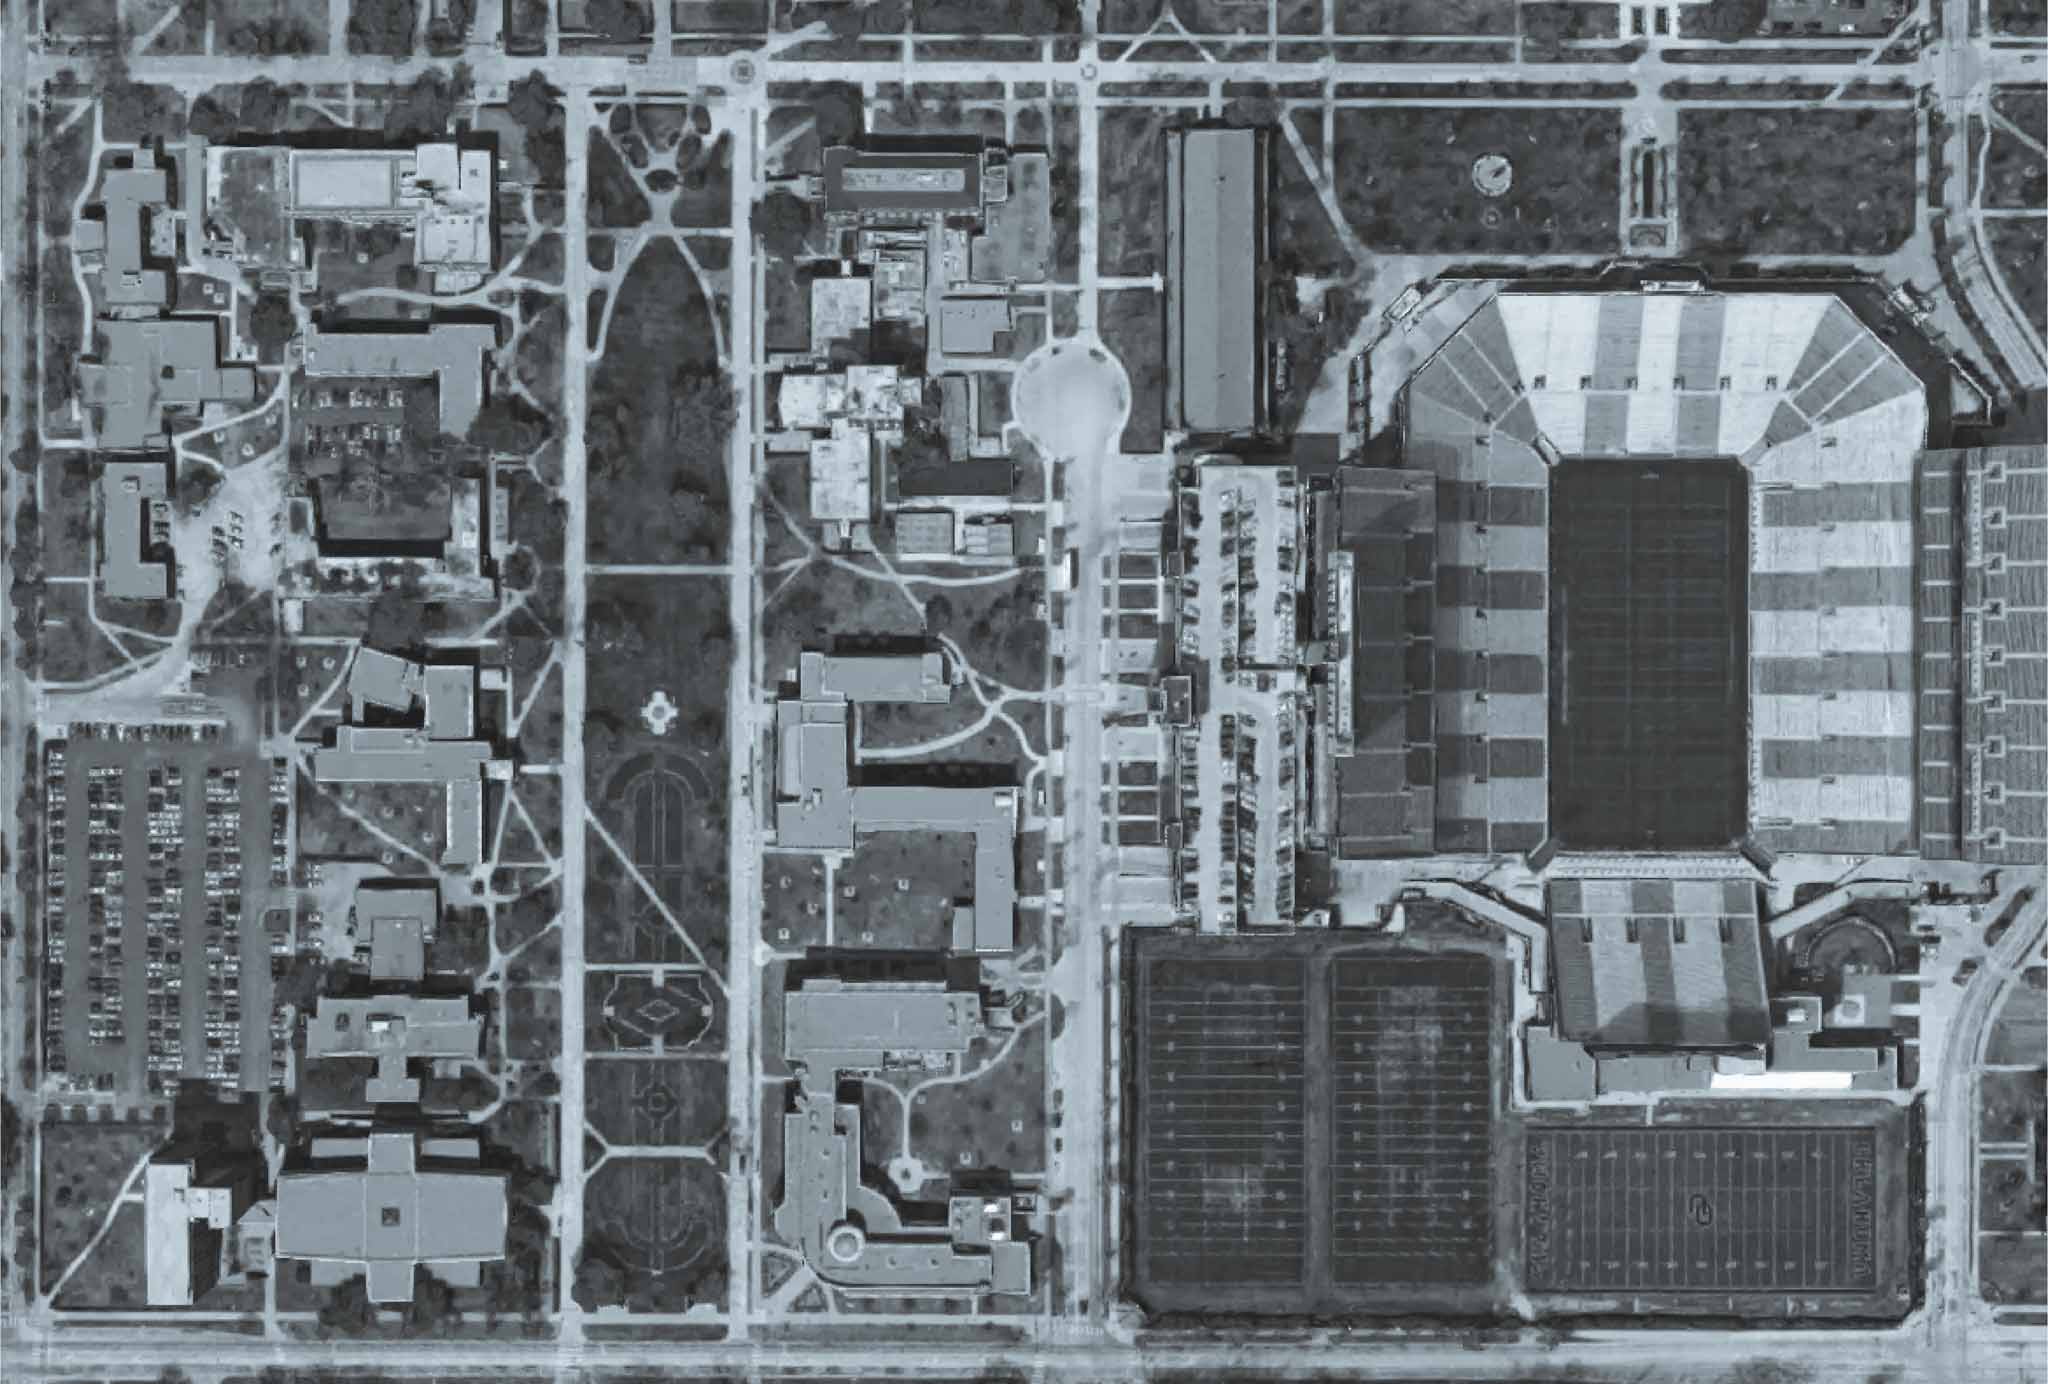 Black and white aerial view of the university.